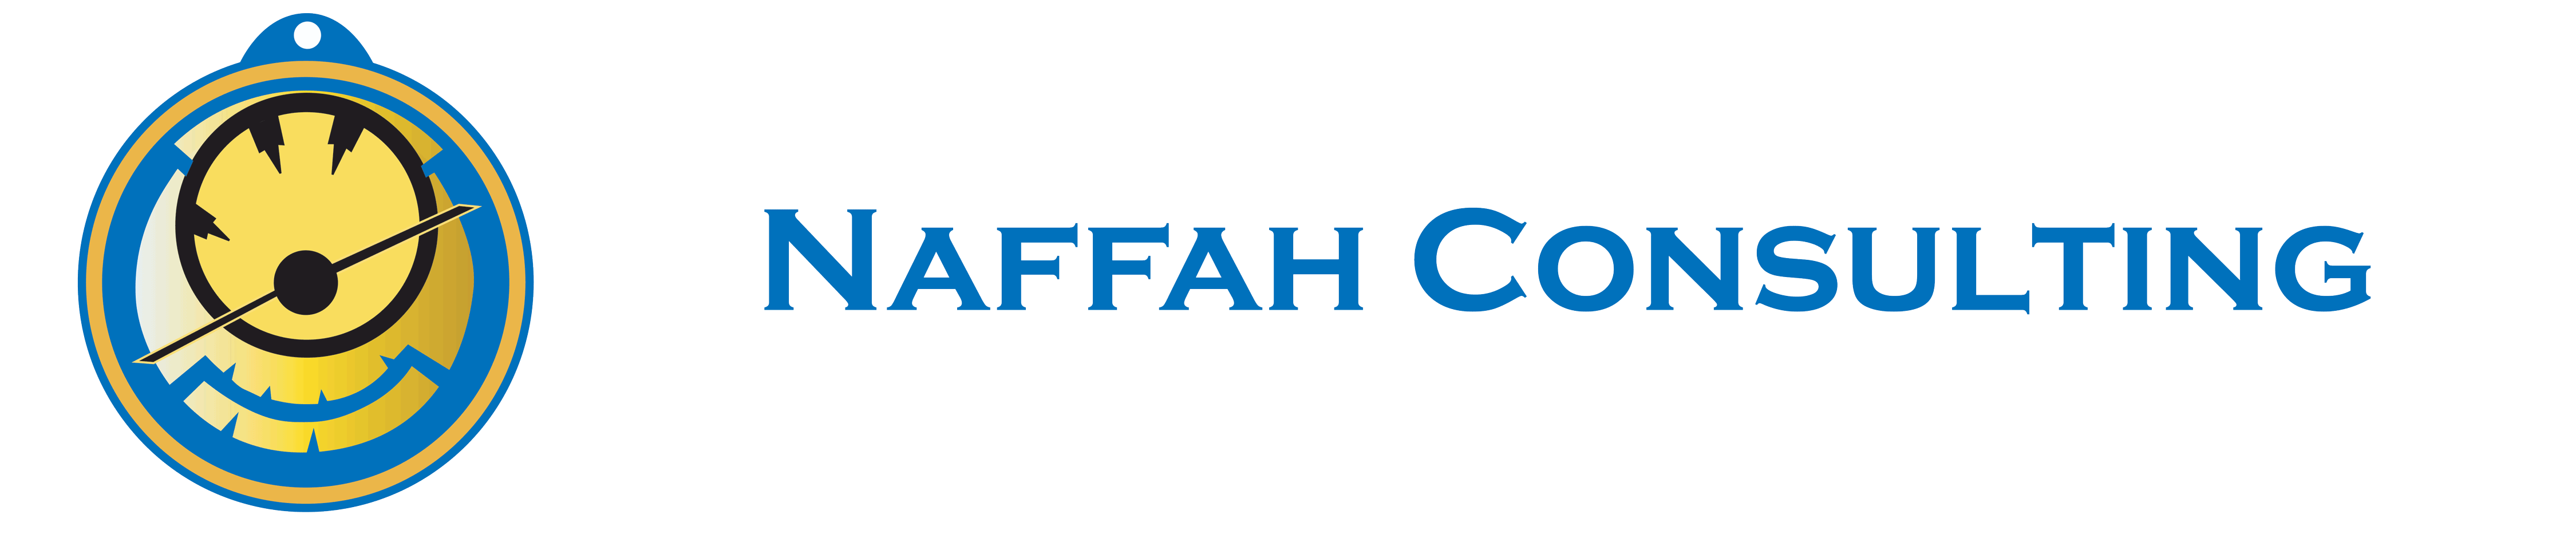 naffahconsulting